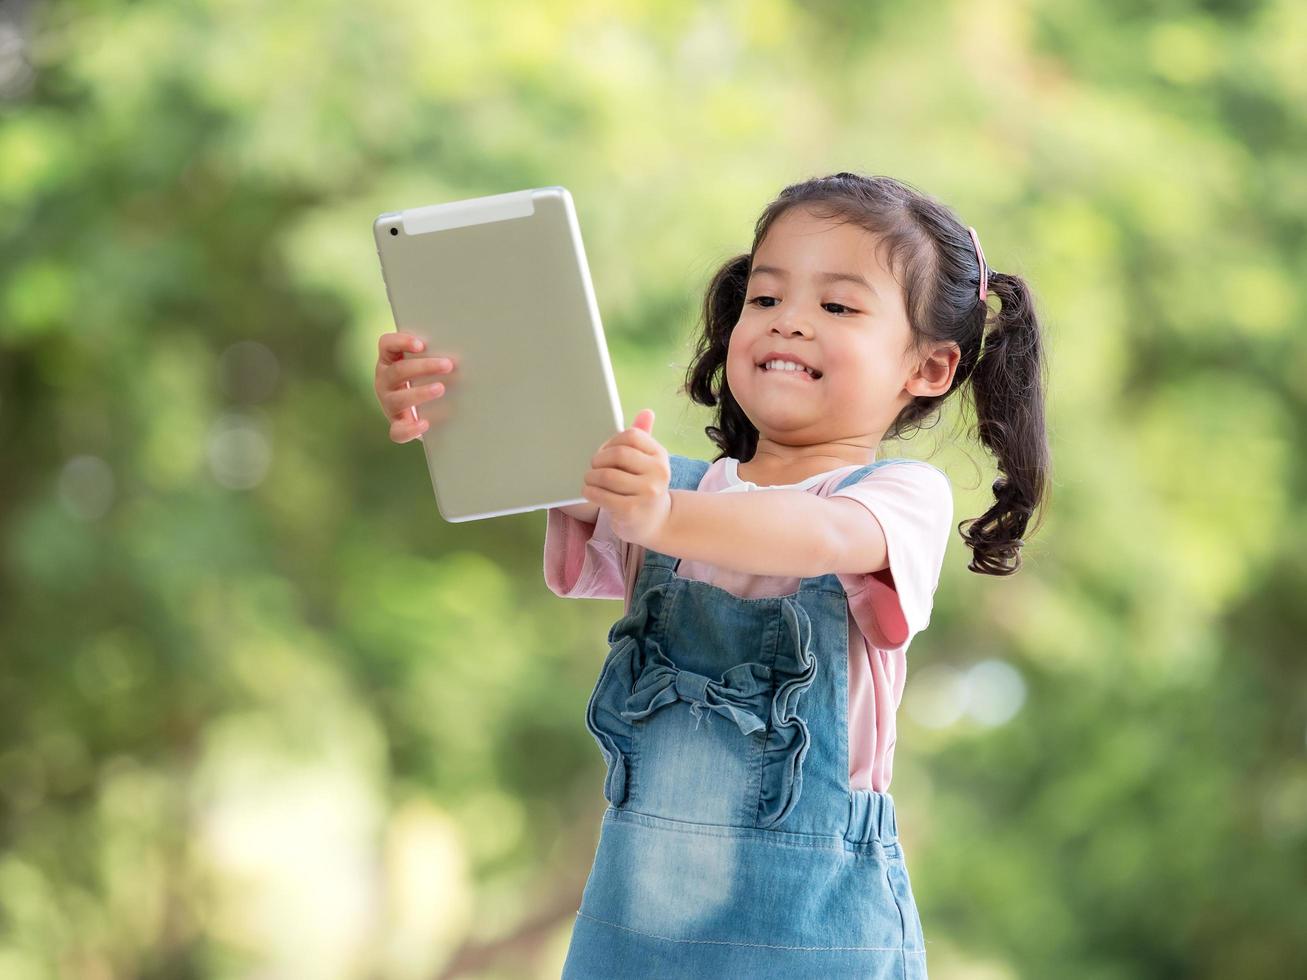 A cute Asian girl is using a tablet for fun playing games and learning outside of school in the park photo